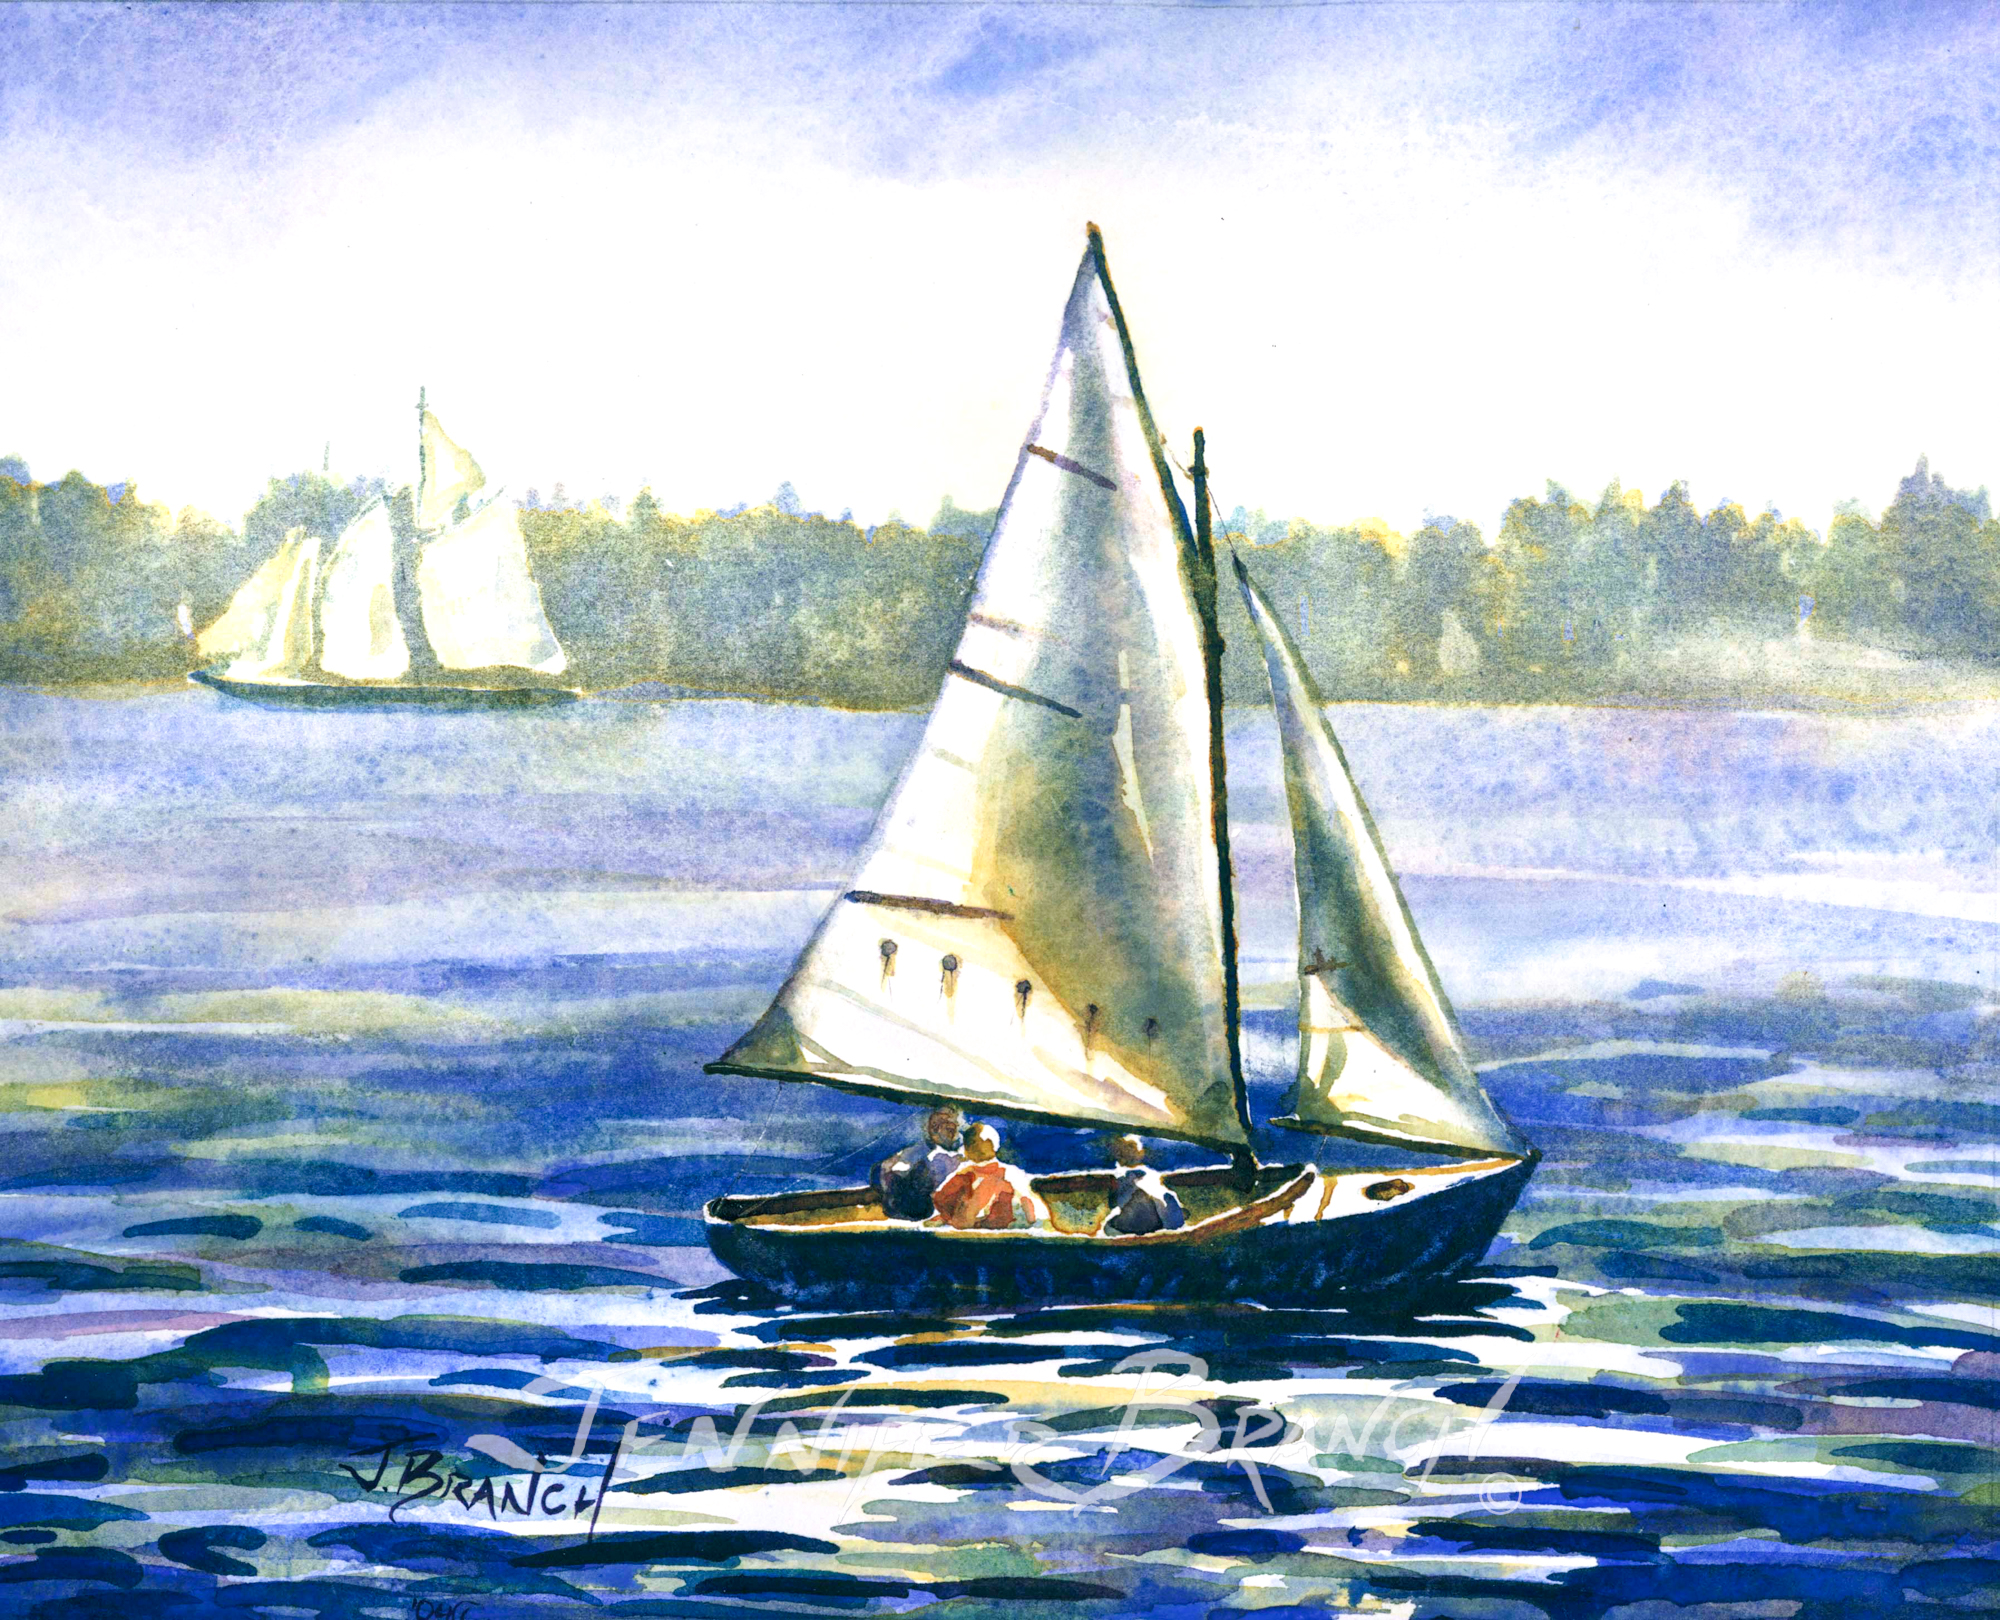 watercolor painting of a Herreshoff 12 1/2 sailboat in Maine, wooden boat by Jennifer Branch.